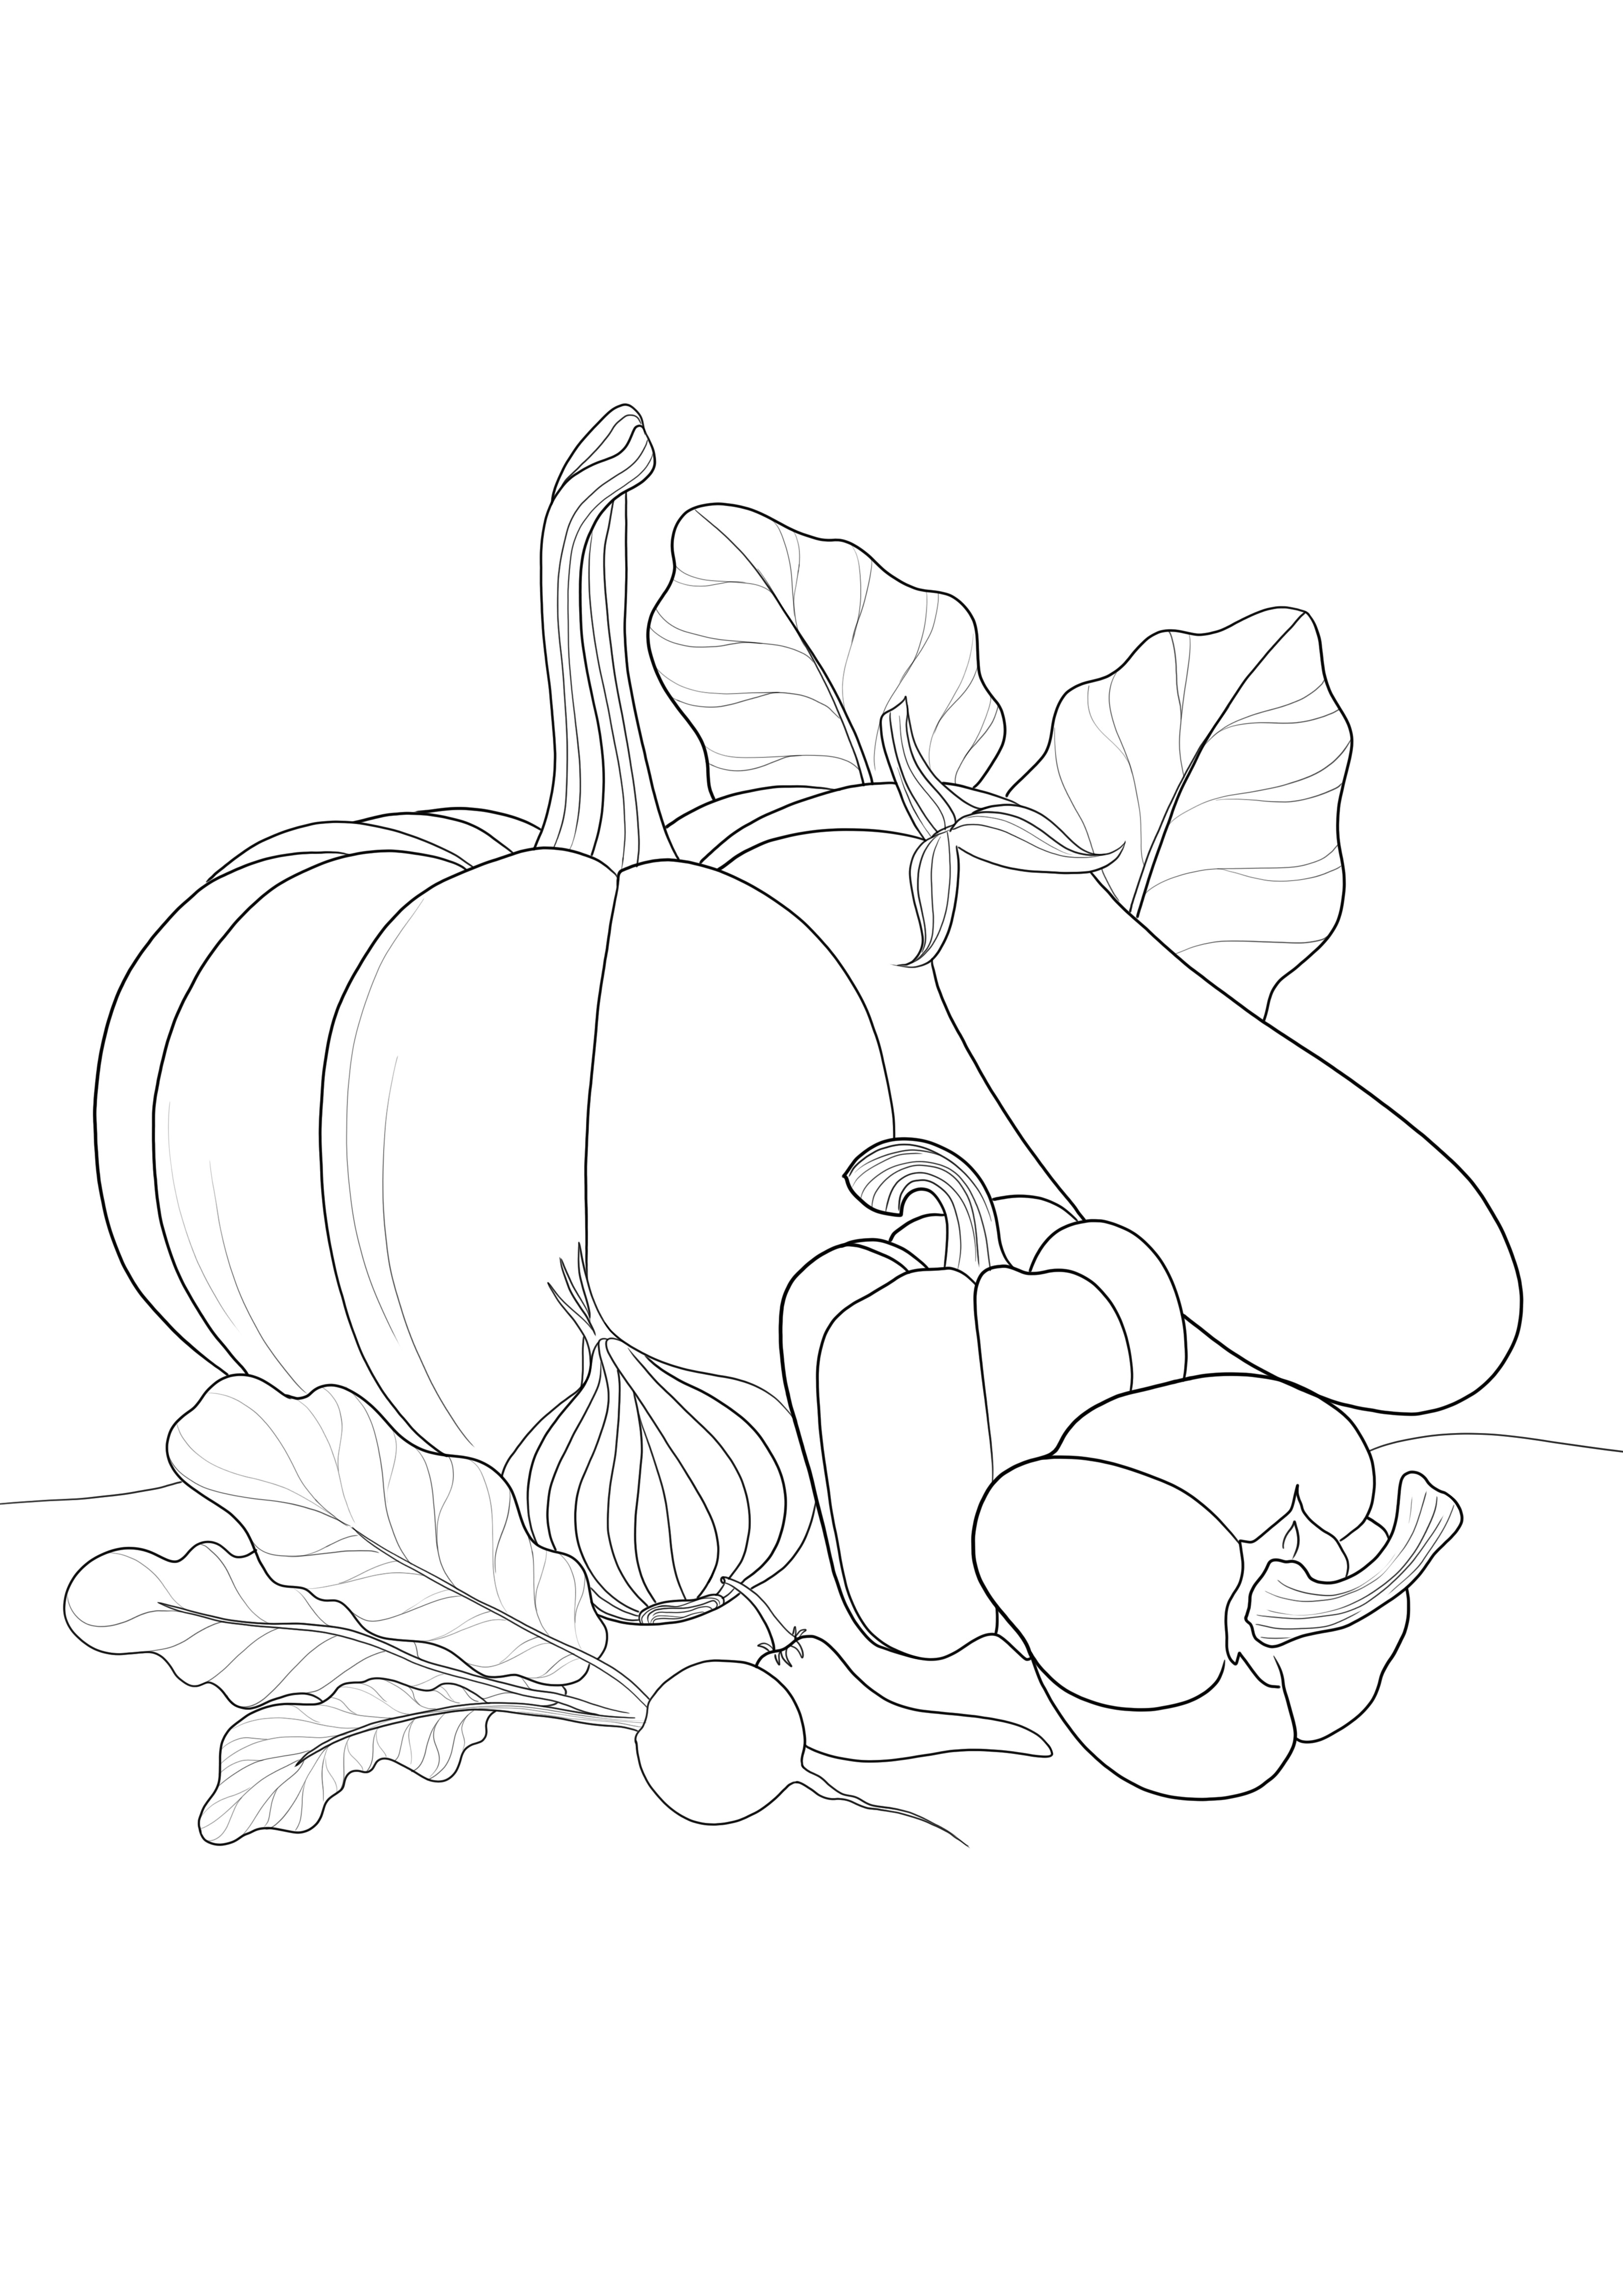 Autumn vegetable simple coloring sheet for free printing